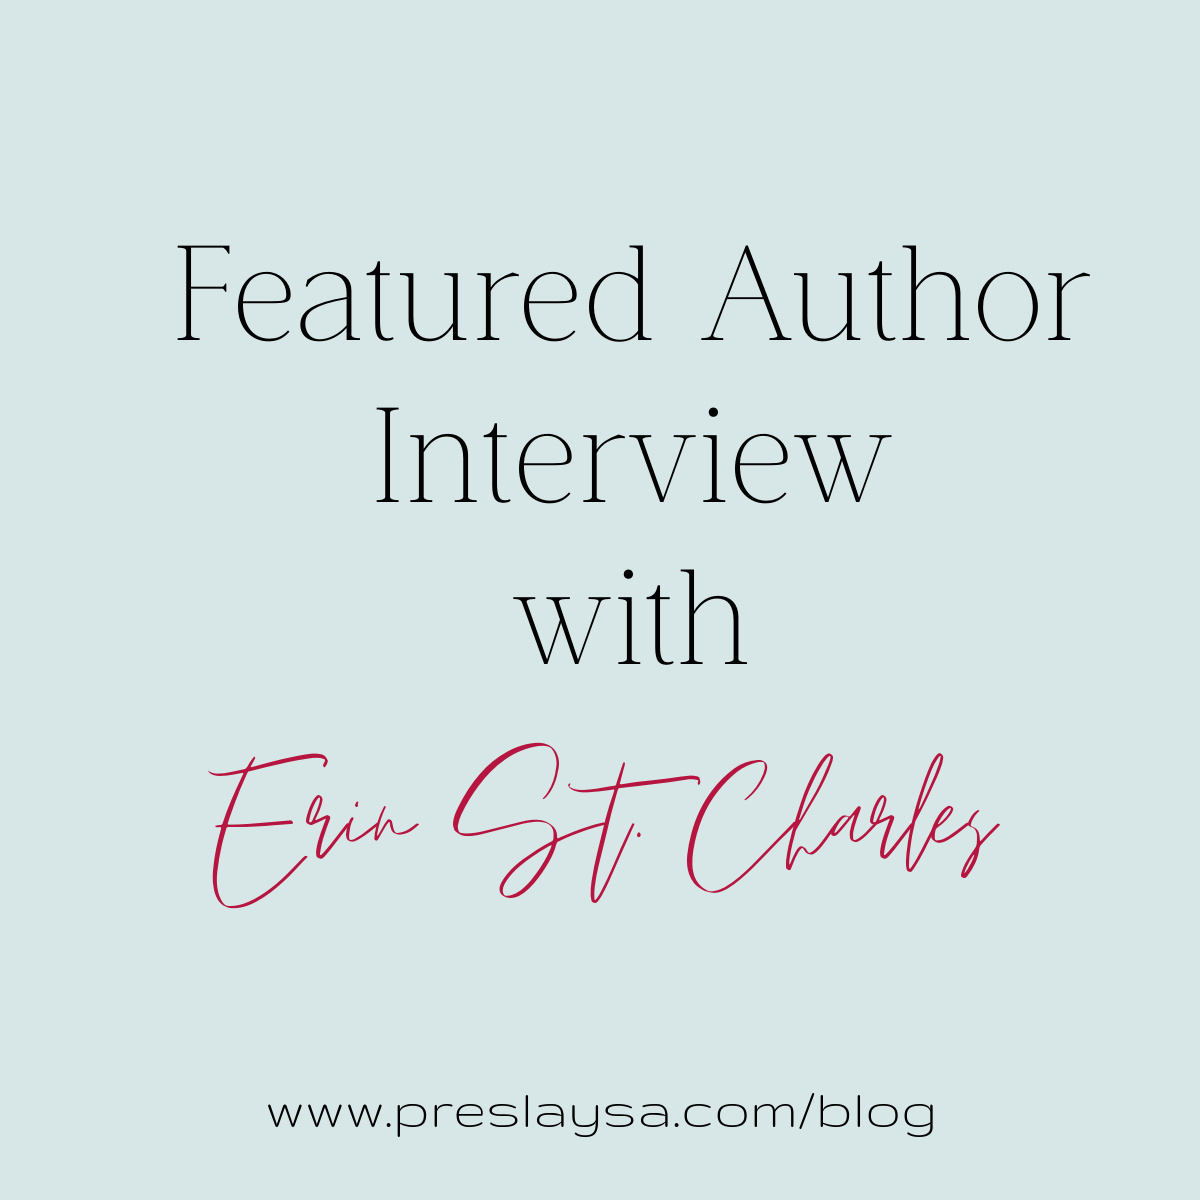 Featured Author Interview with Erin St. Charles